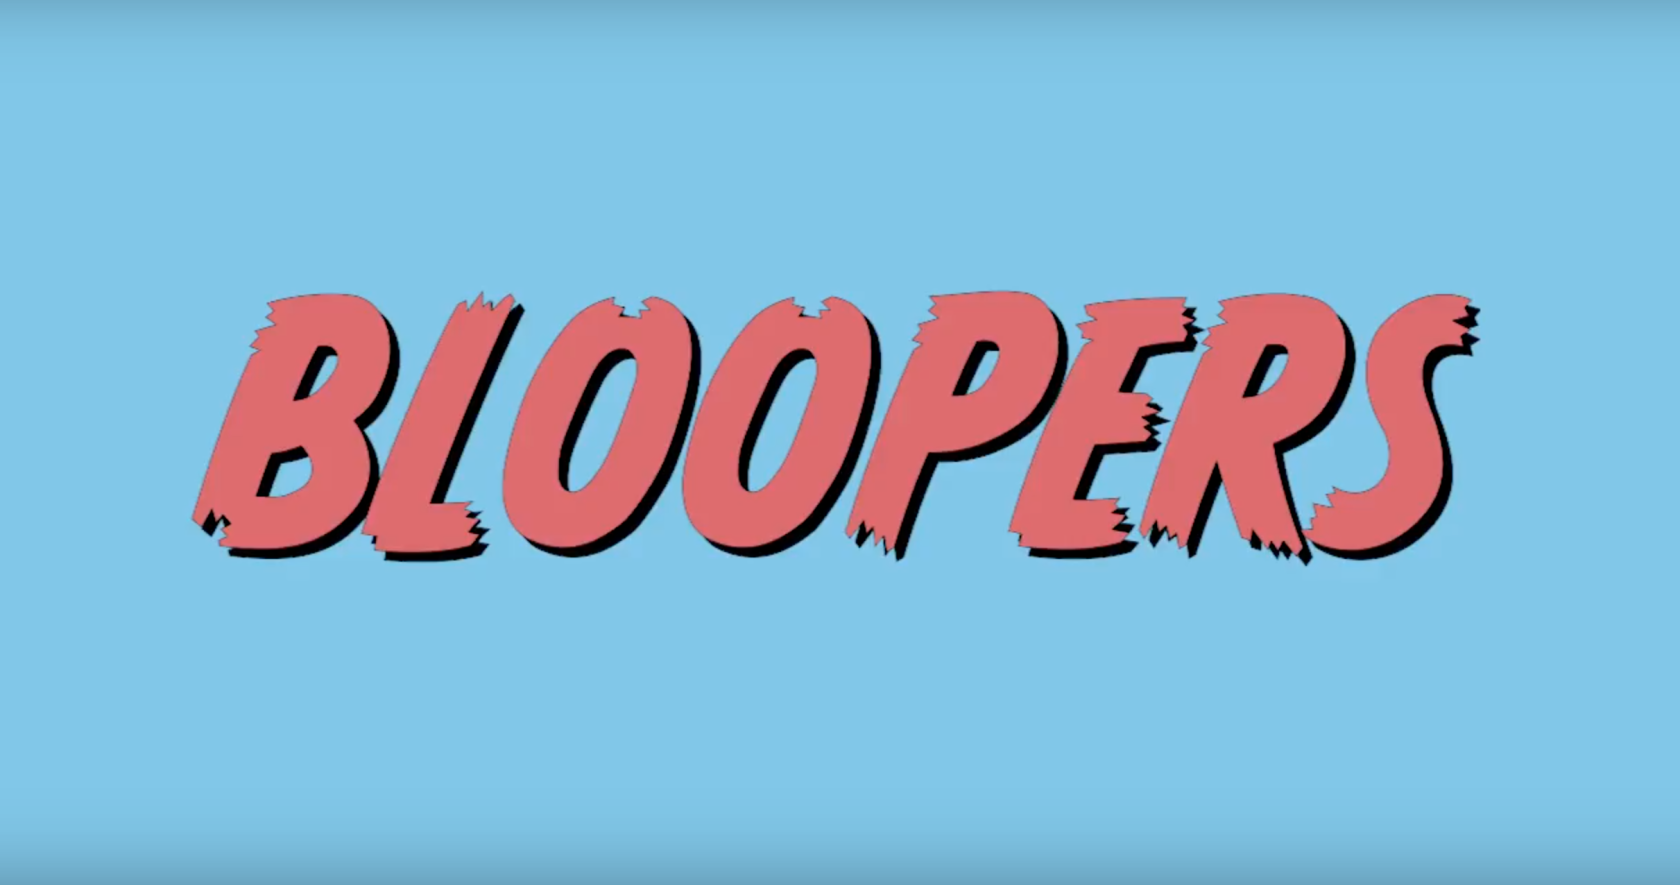 HEDNA LA 2019 |  Bloopers & Outtakes